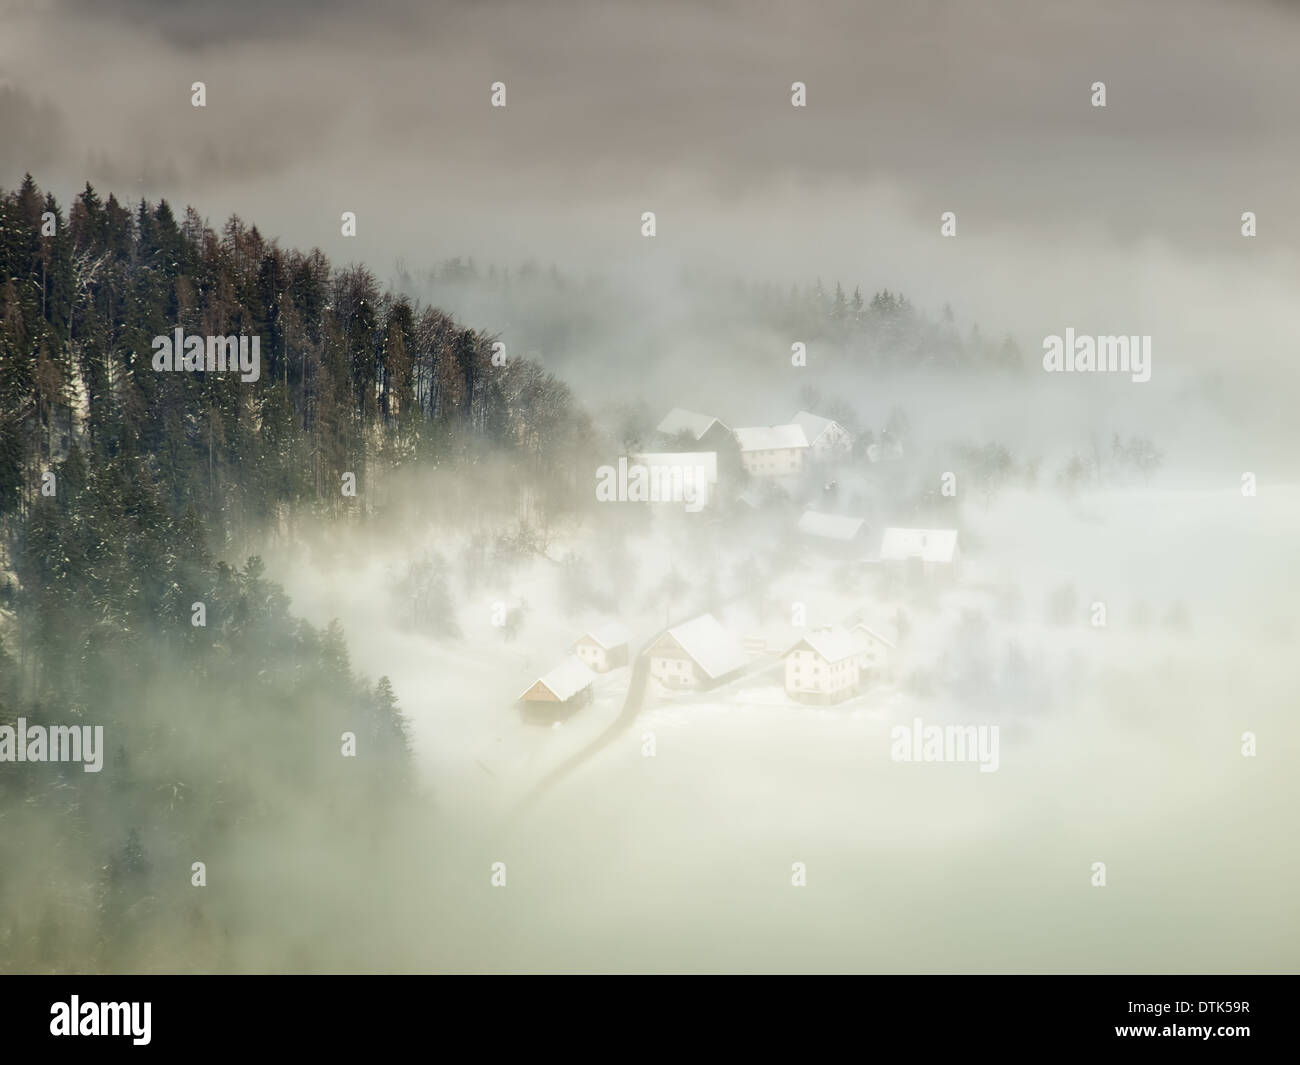 View from the mountain to the alpine village in the mist. Stock Photo